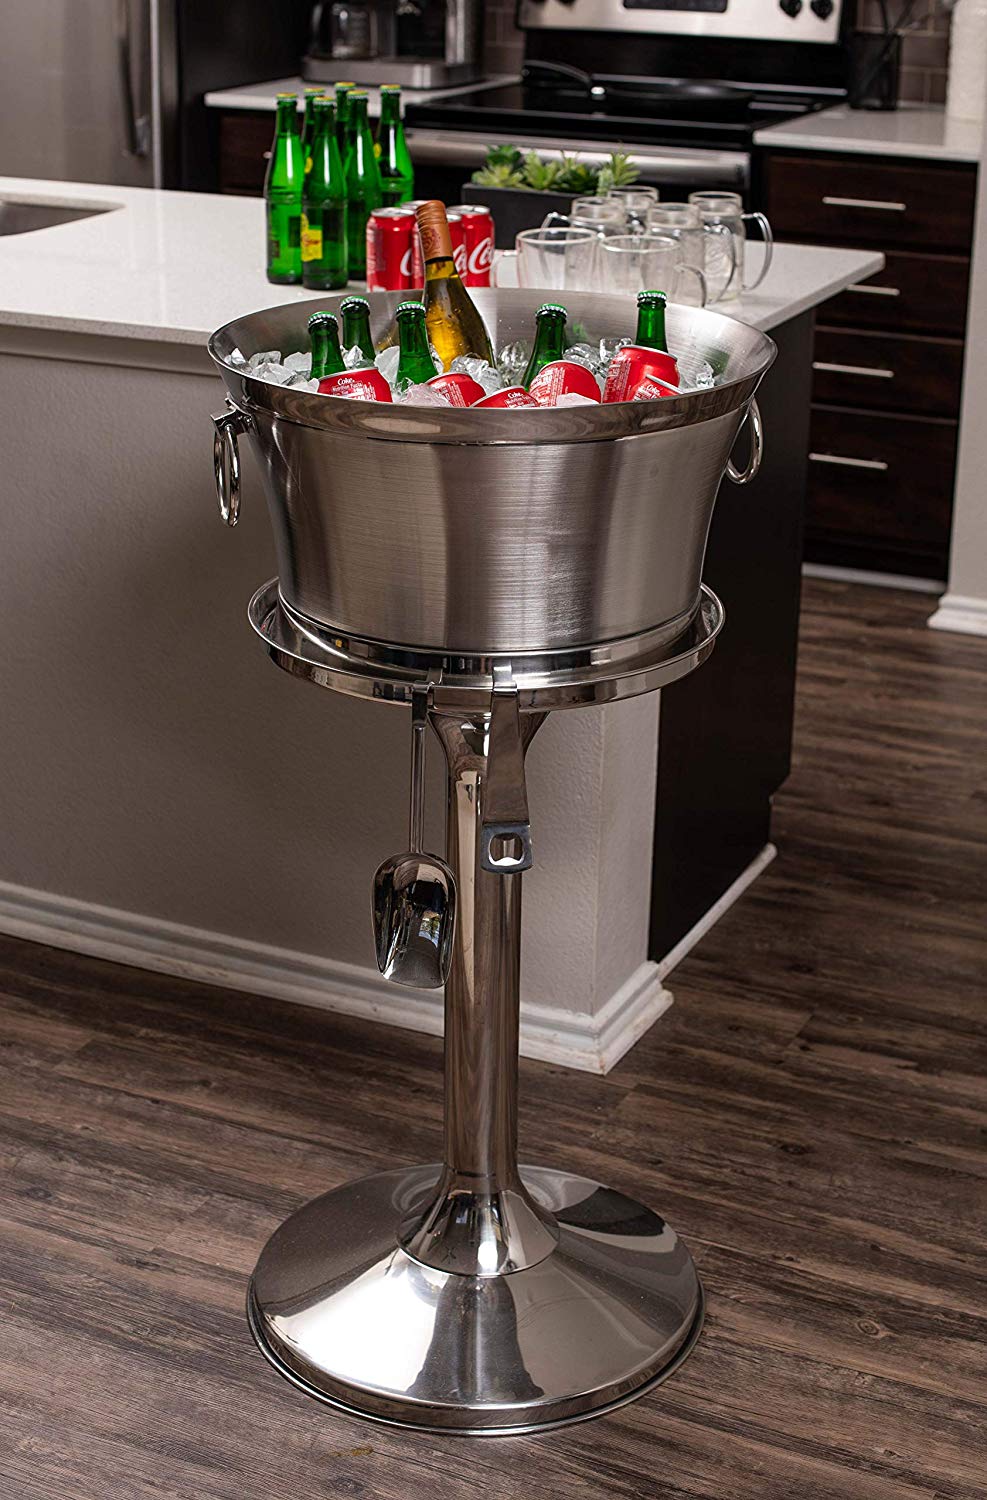 BirdRock Home 18/8 Stainless Steel 30 Qt. Beverage Tub with Stand - Silver - image 2 of 9